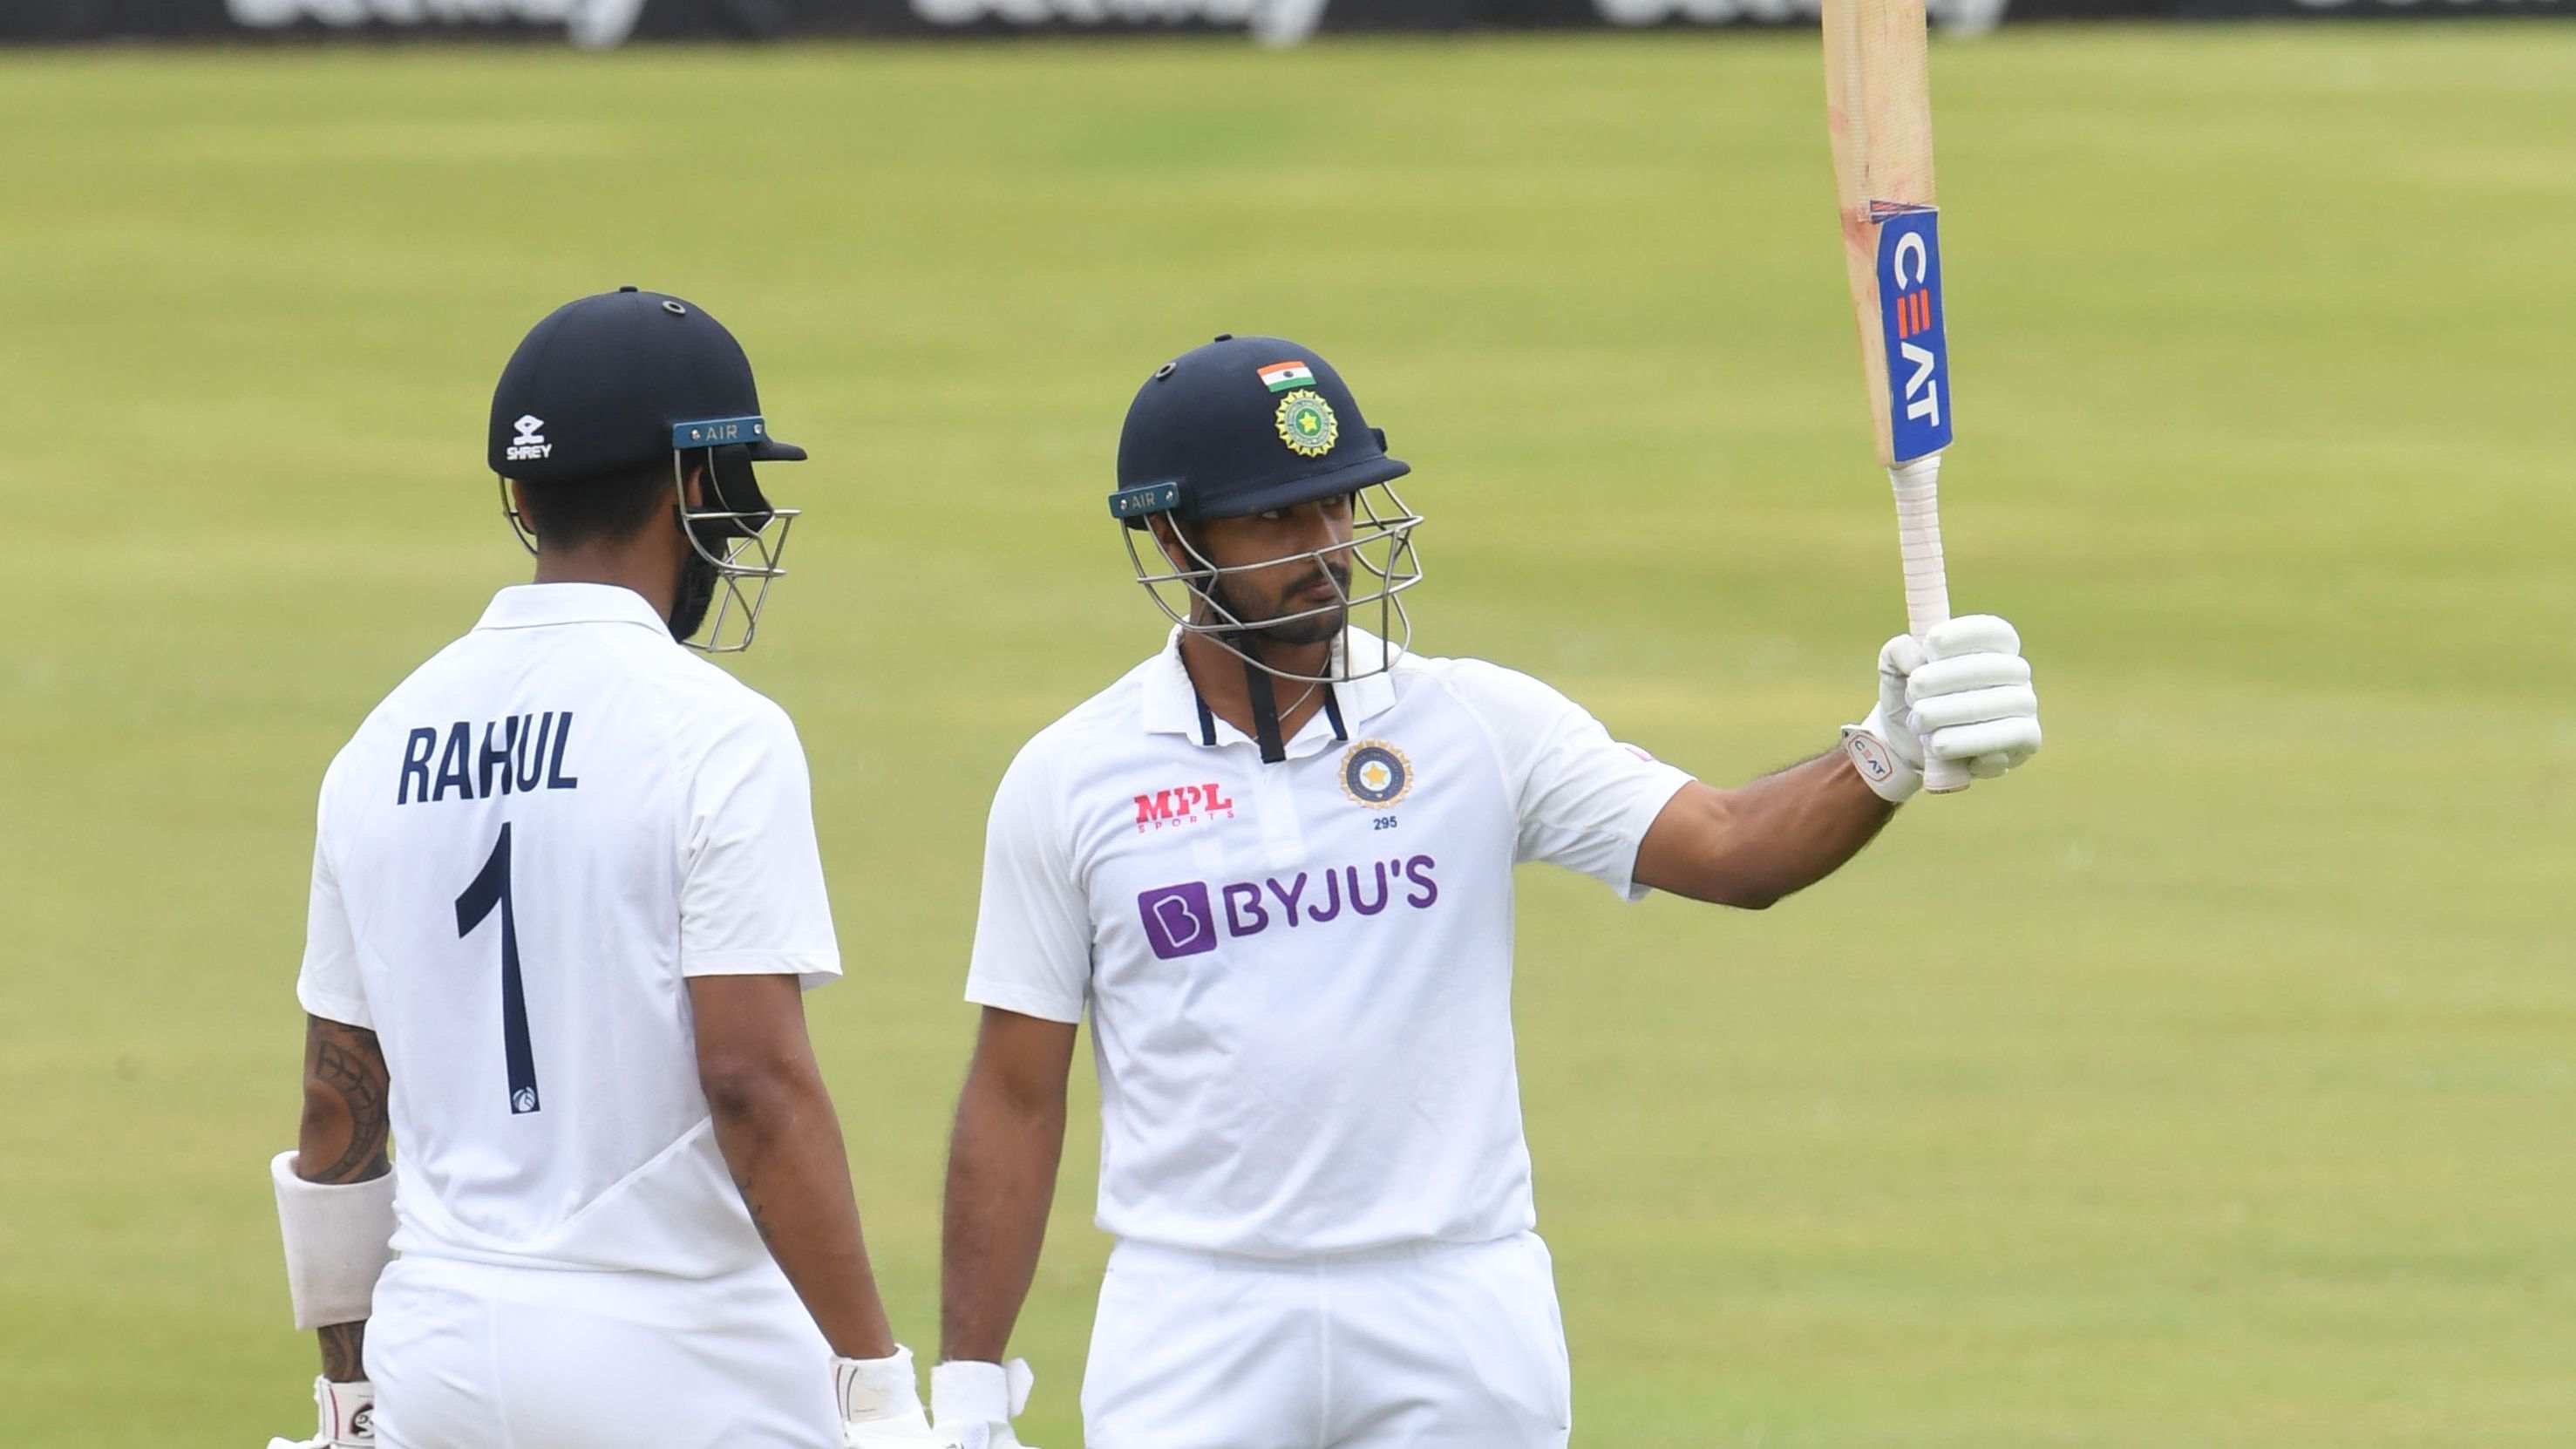 SA vs IND | 1st Test | Day 1: Mayank Agarwal highlights discipline with bat for commanding start